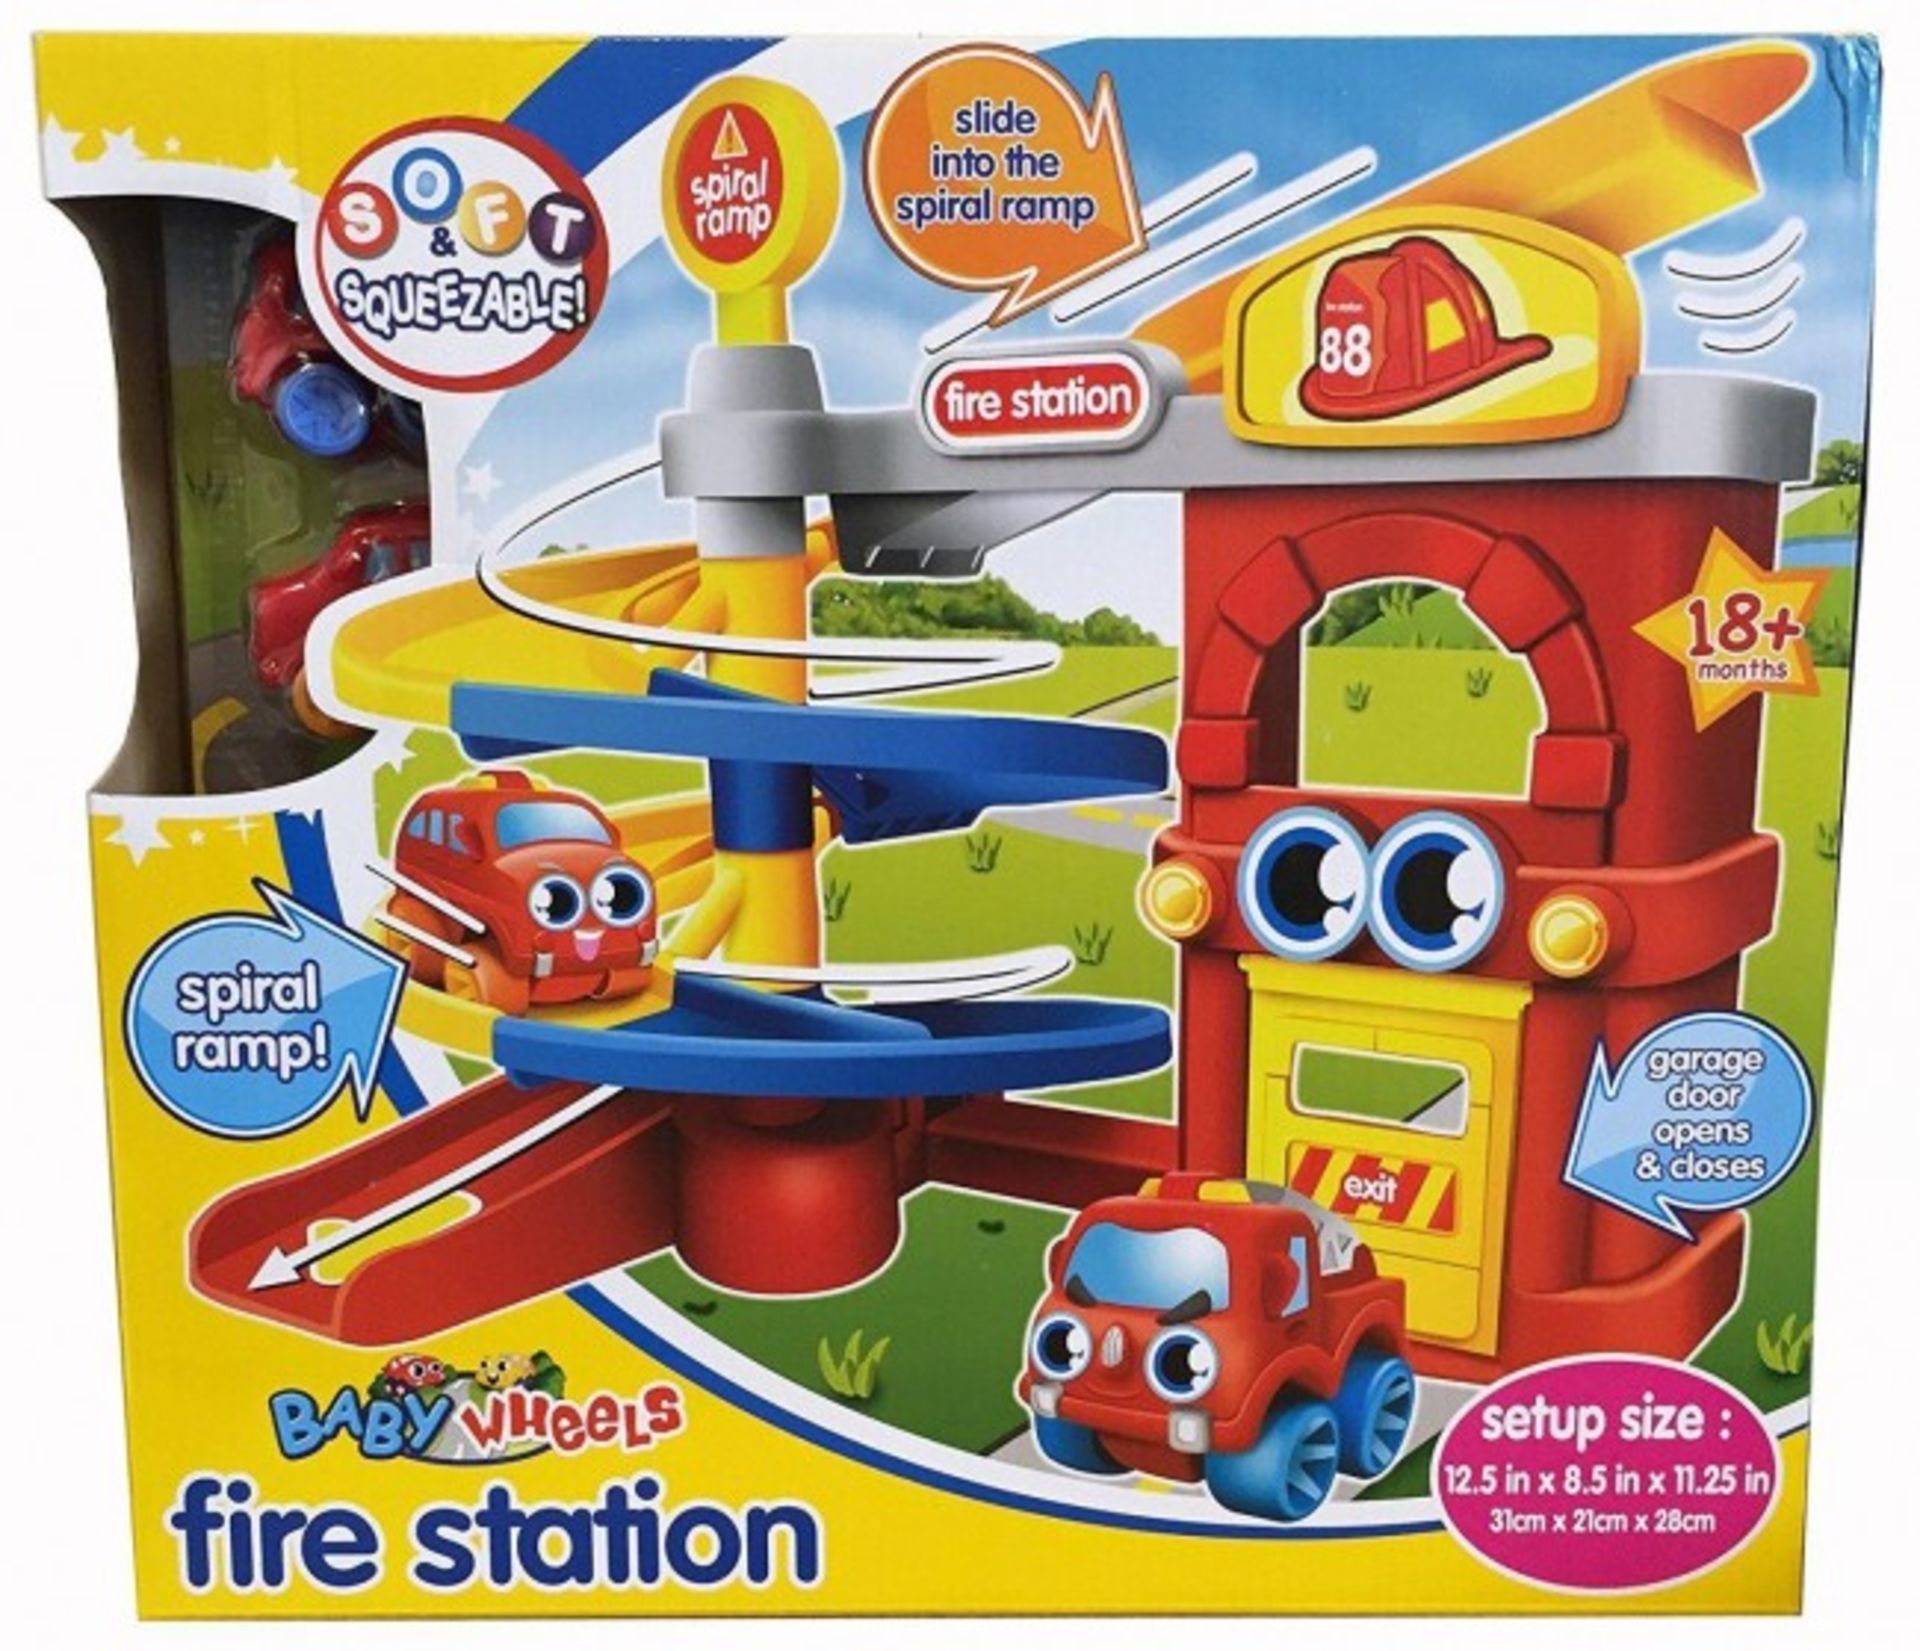 V *TRADE QTY* Brand New Baby Wheels Fire Station Play Set 8mths + ISP £12.99 (My Shop) X 7 YOUR